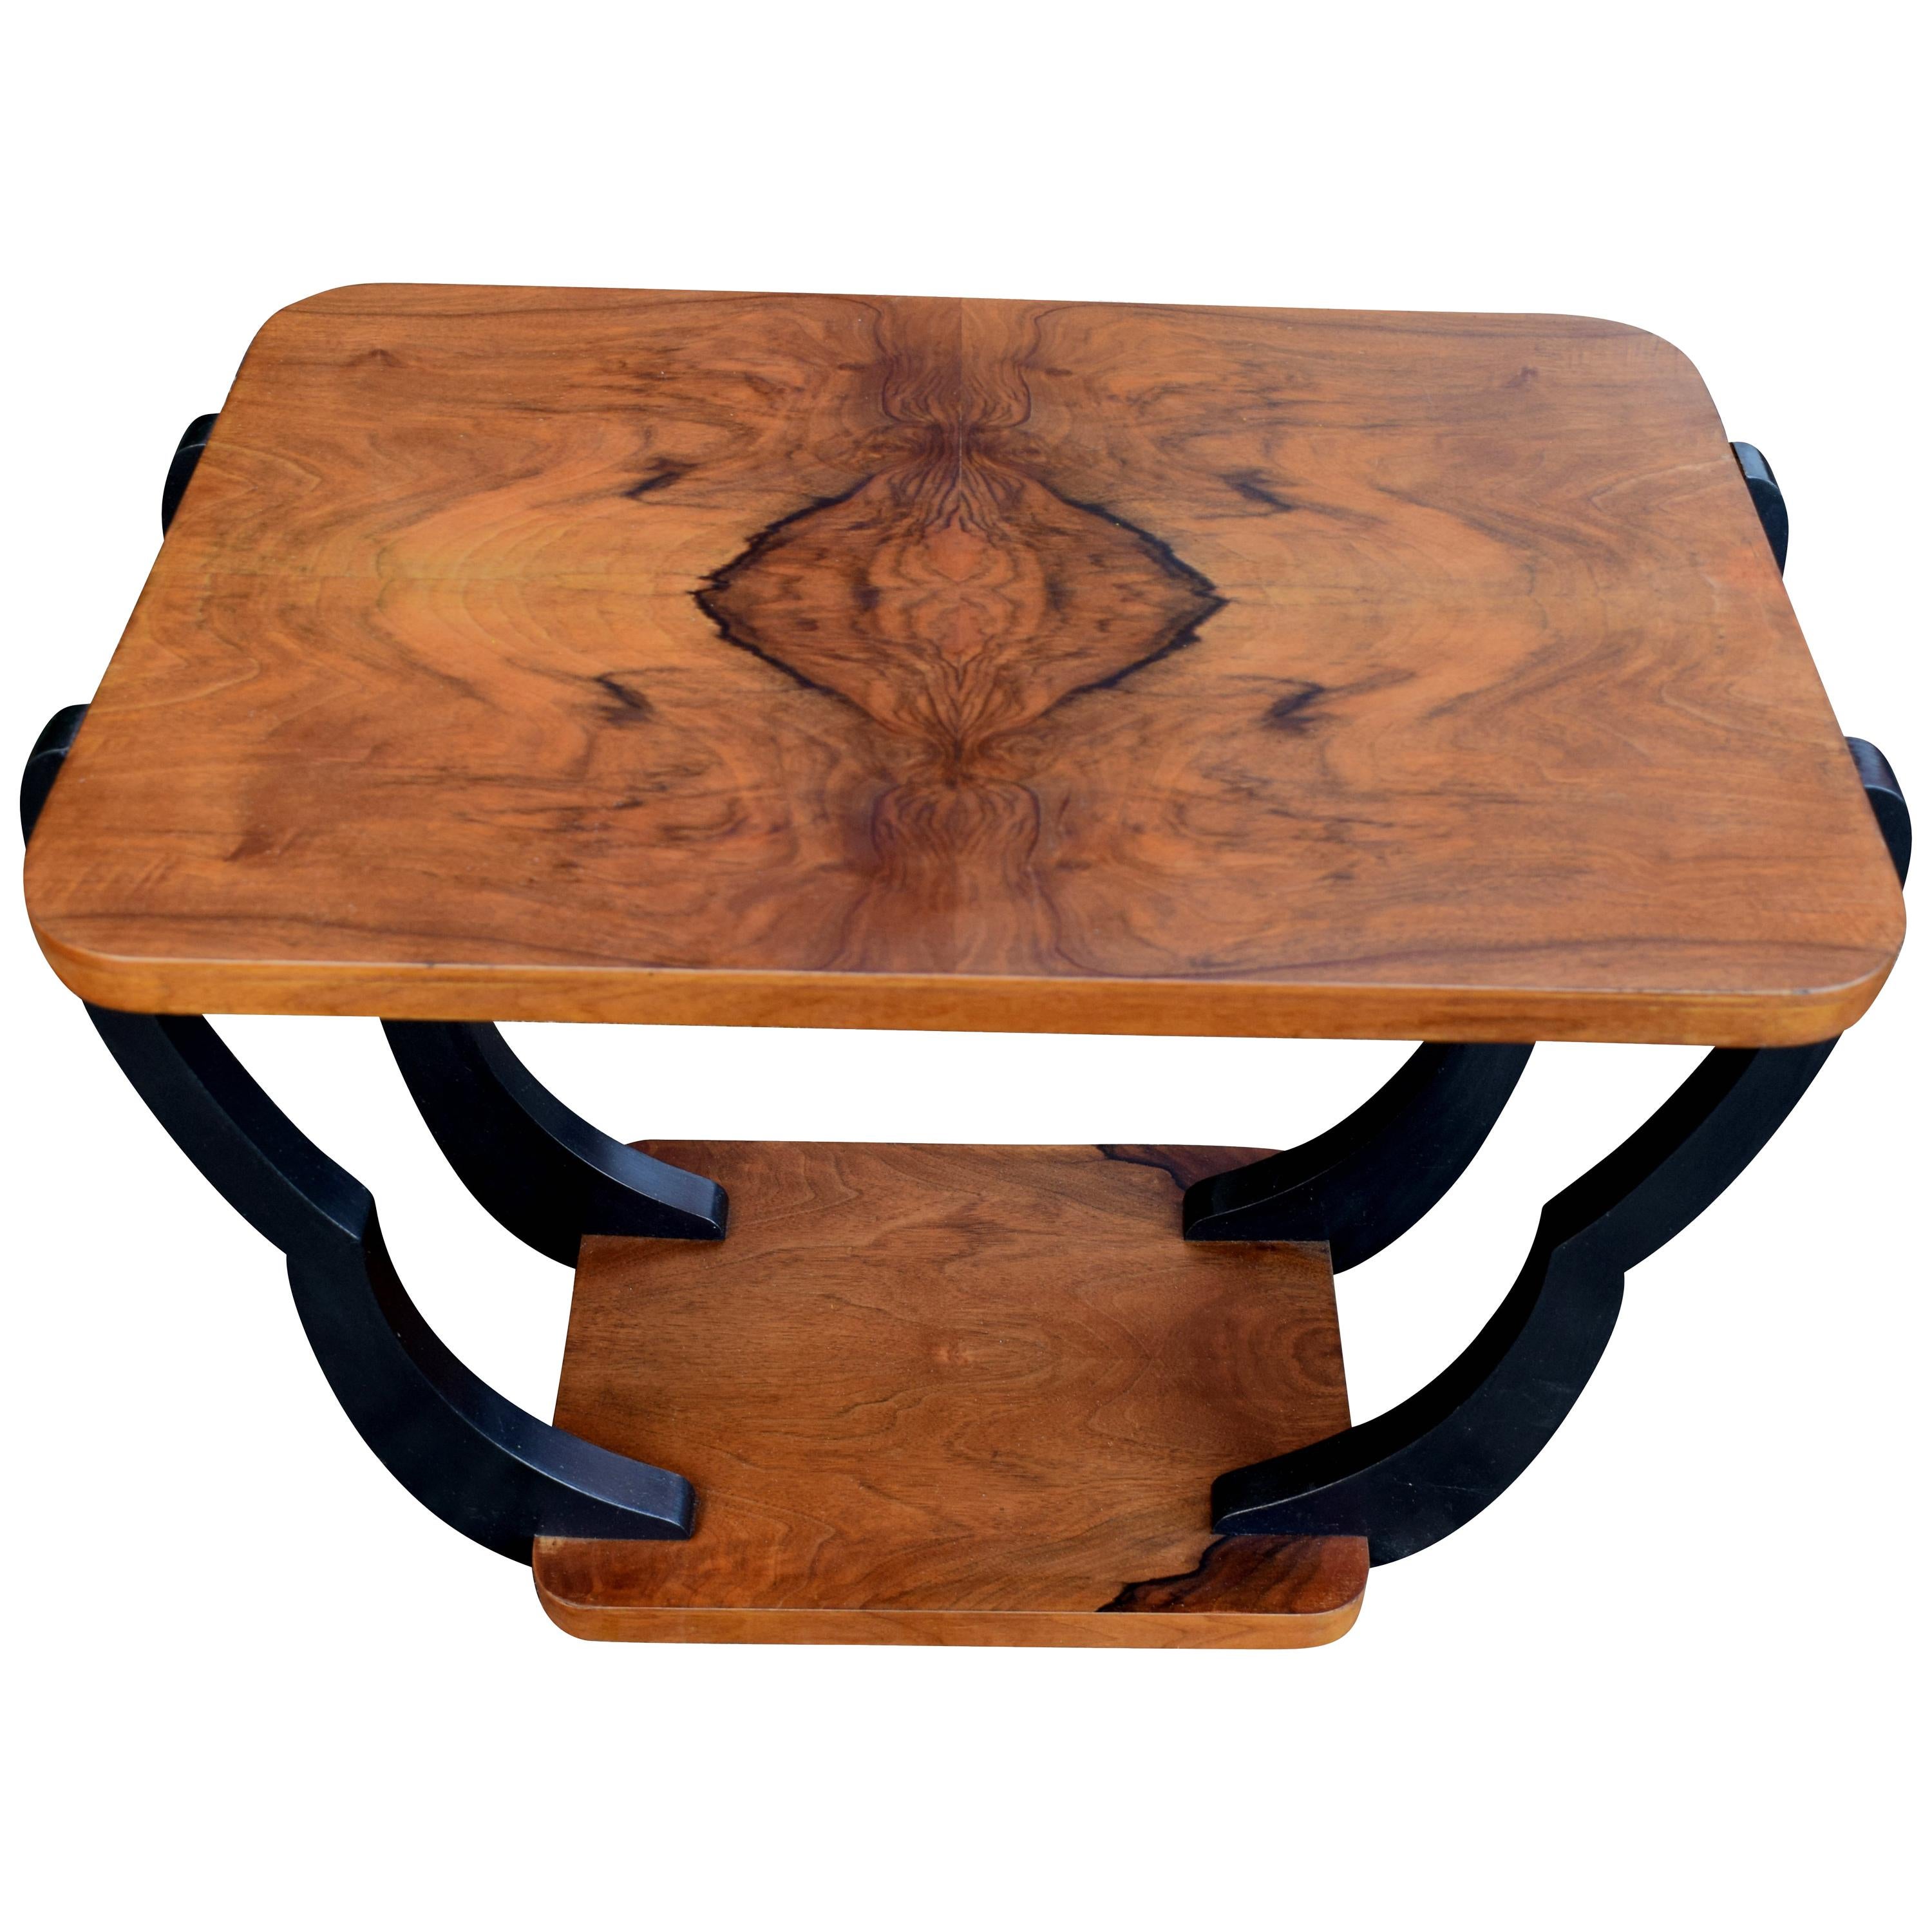 Two-Tiered Art Deco English Walnut Occasional Table, circa 1930s